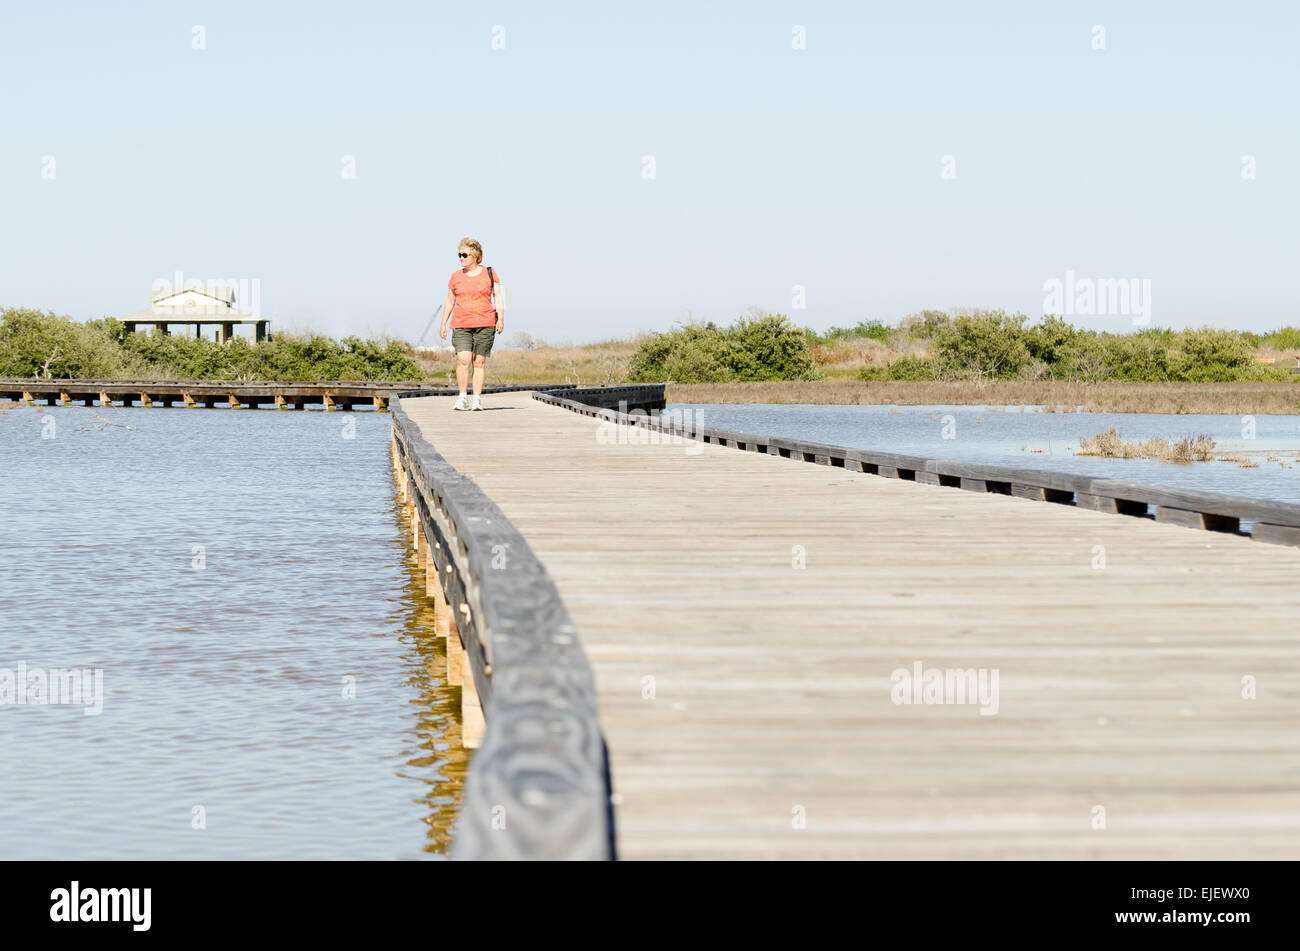 Woman in her 60s walking along the boardwalk in Charlies' Pasture Nature Preserve in Port Aransas, Texas USA Stock Photo